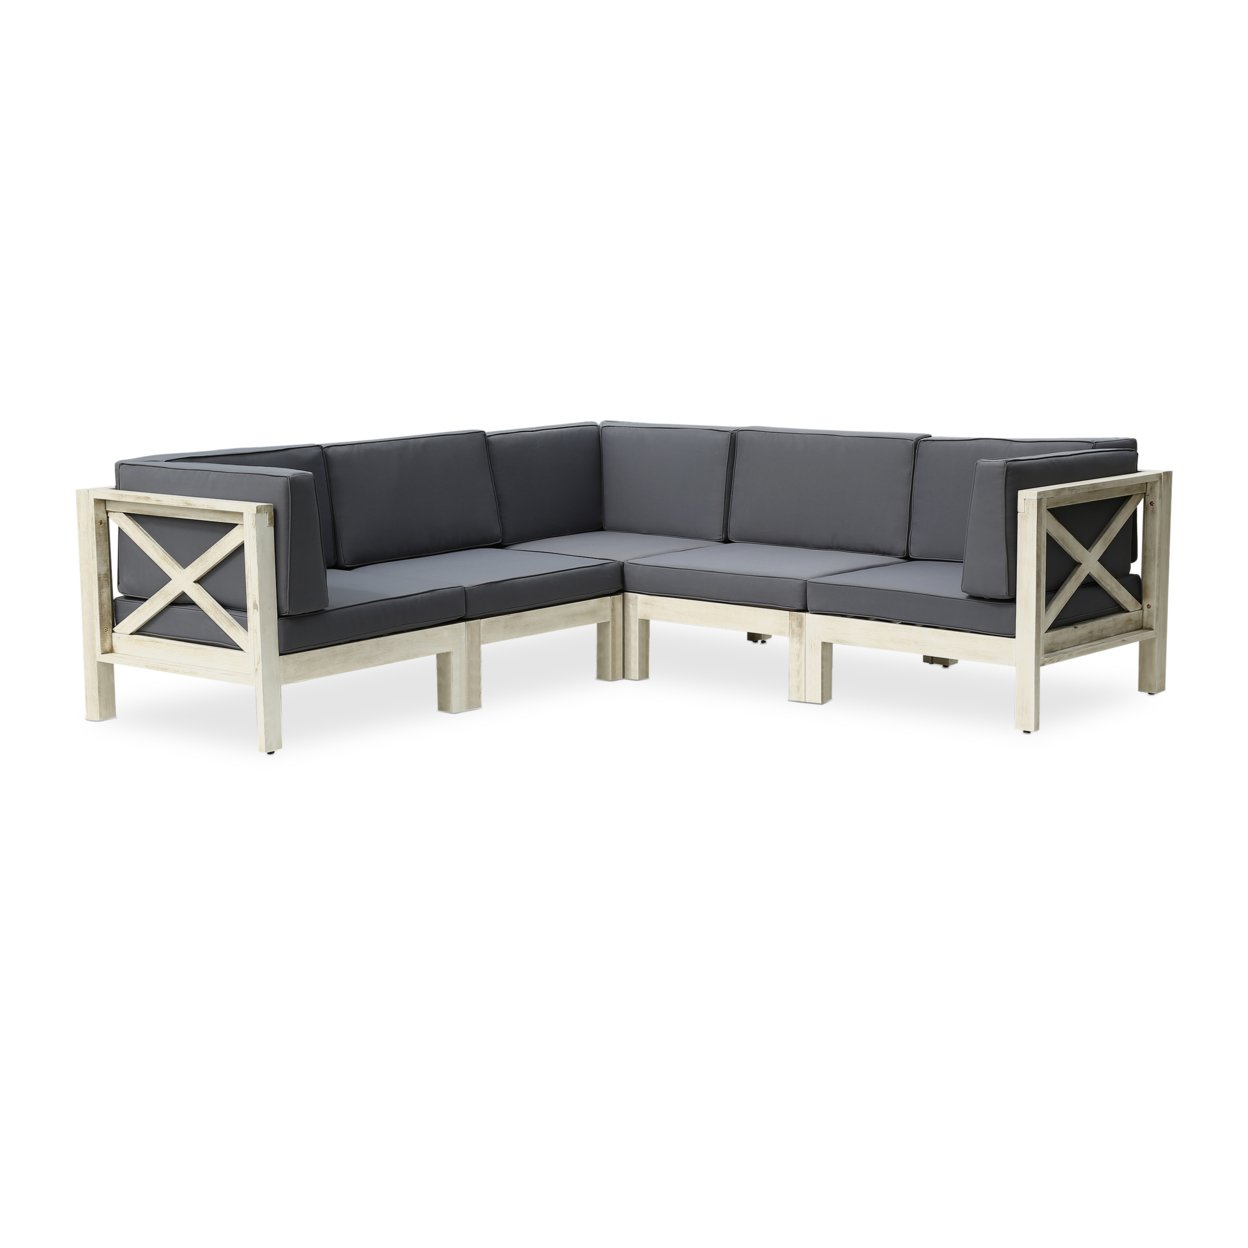 Brava Outdoor Acacia Wood 5 Seater Sectional Sofa Set With Water-Resistant Cushions - Weathered Gray + Dark Gray